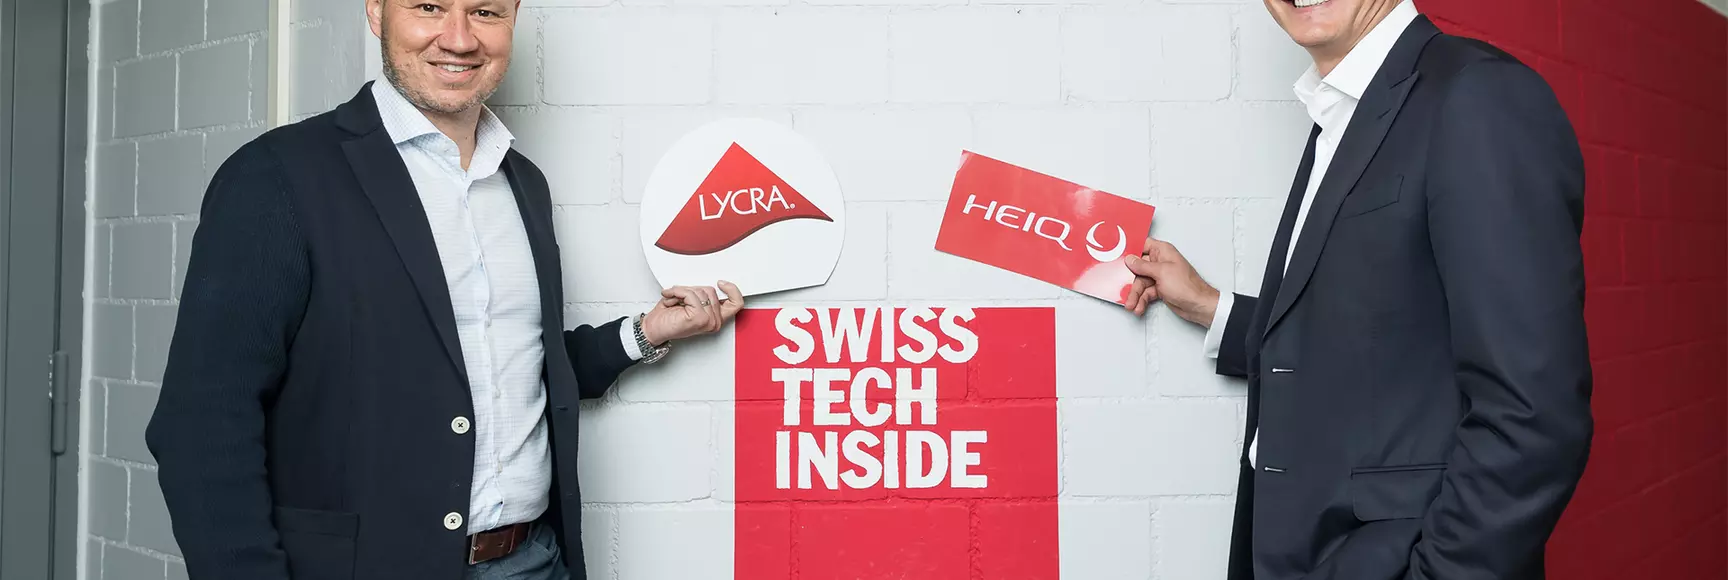 Julien Born, President & CEO of The LYCRA Company and HeiQ CEO & Co-founder, Carlo Centonze.